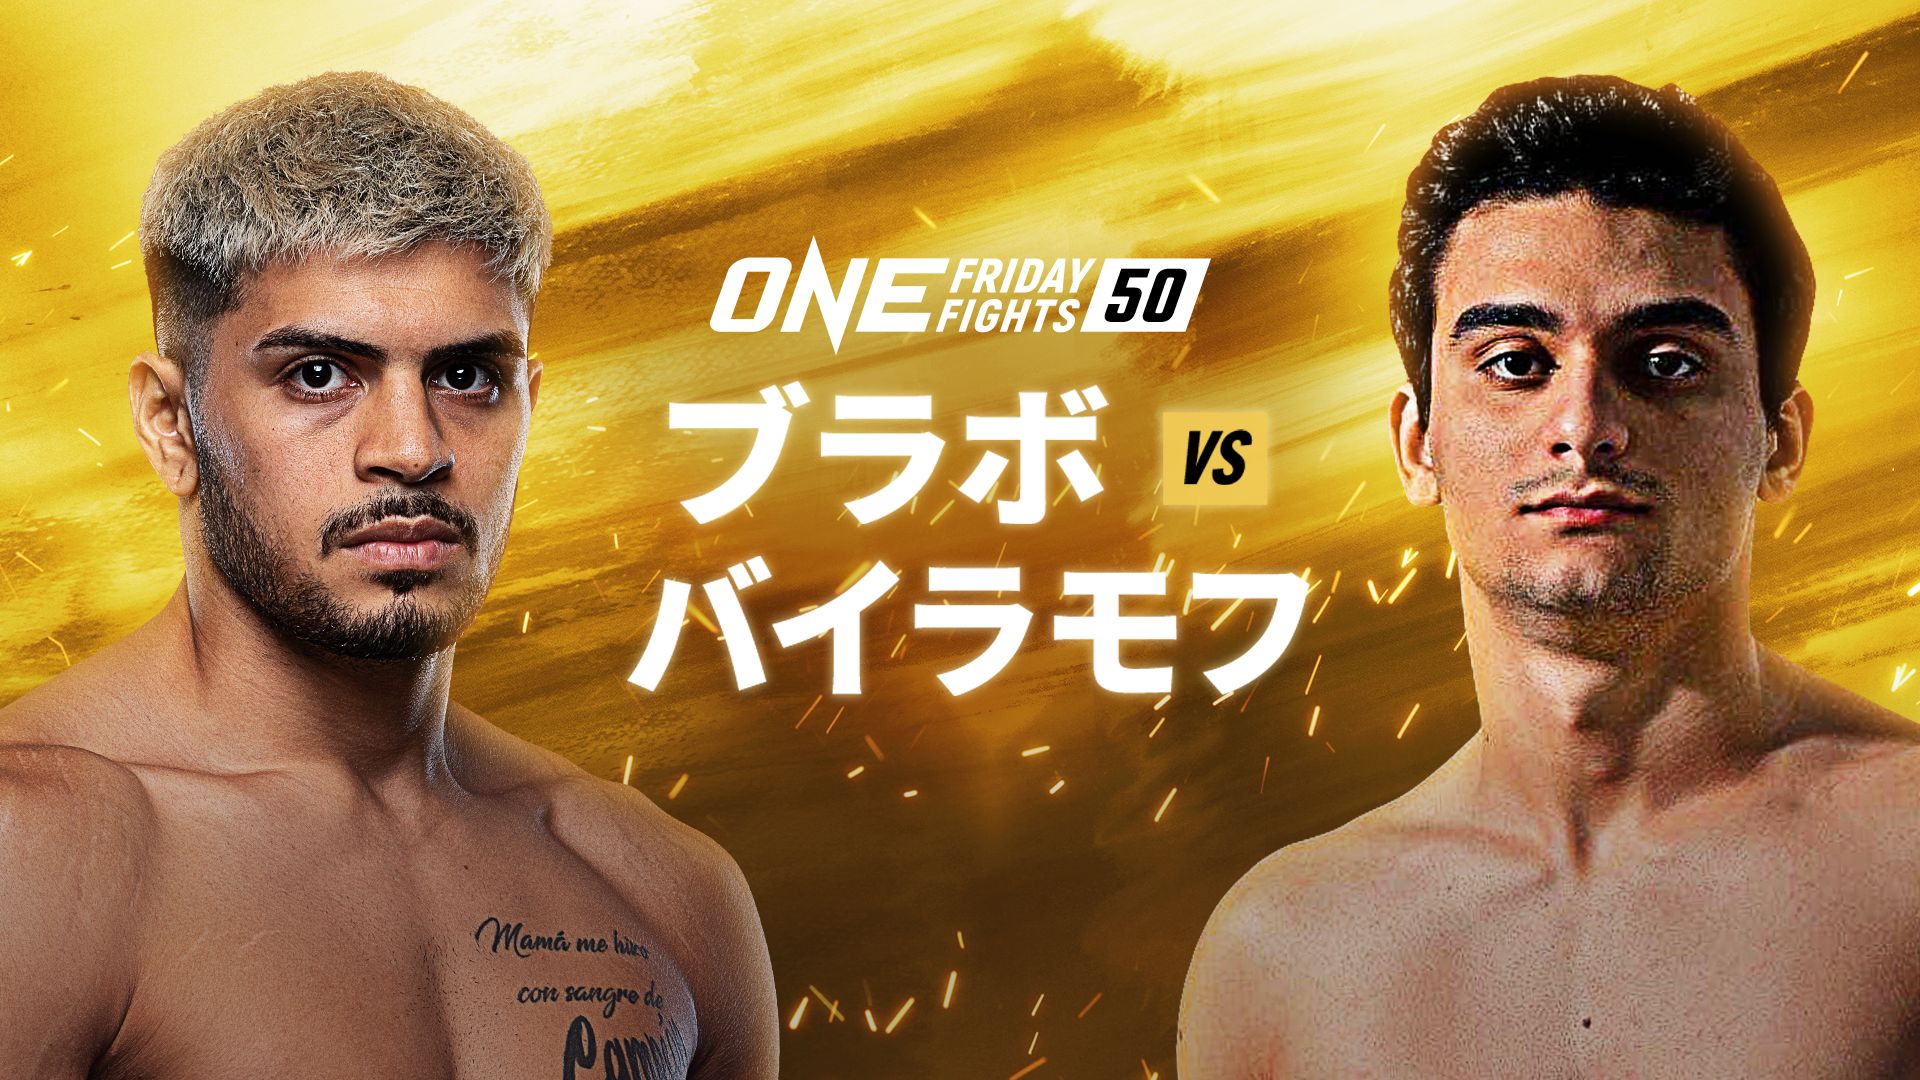 ONE Friday Fights 50